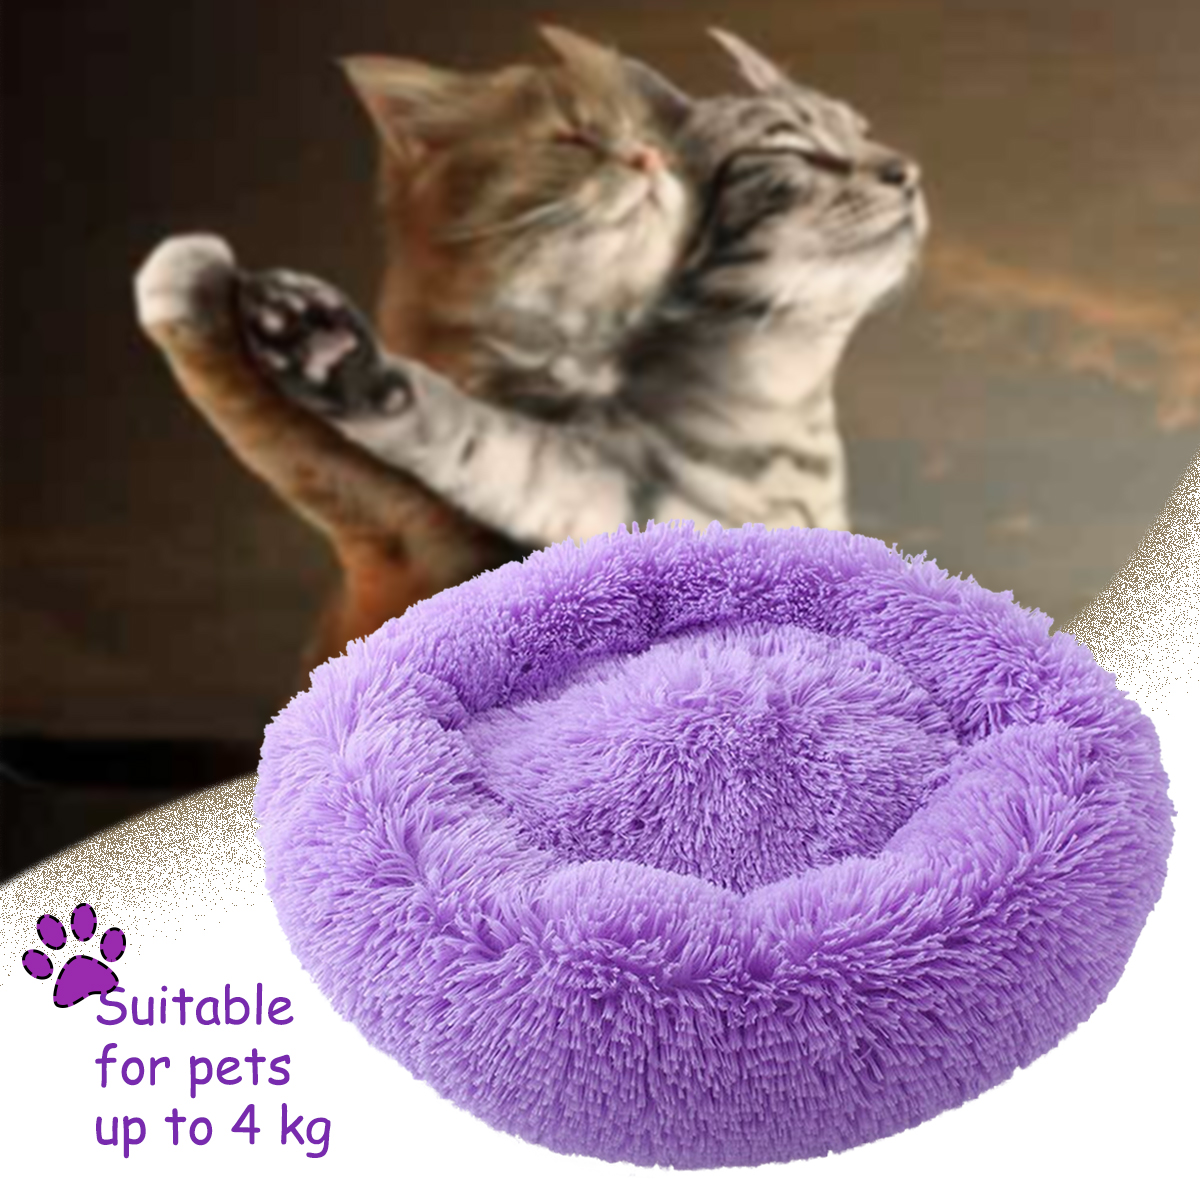 Soft-Puppy-Cat-Dog-Pet-Bed-Cave-Sleeping-House-Mat-Cushion-Warm-Washable-Pet-Supplies-Home-1631364-7